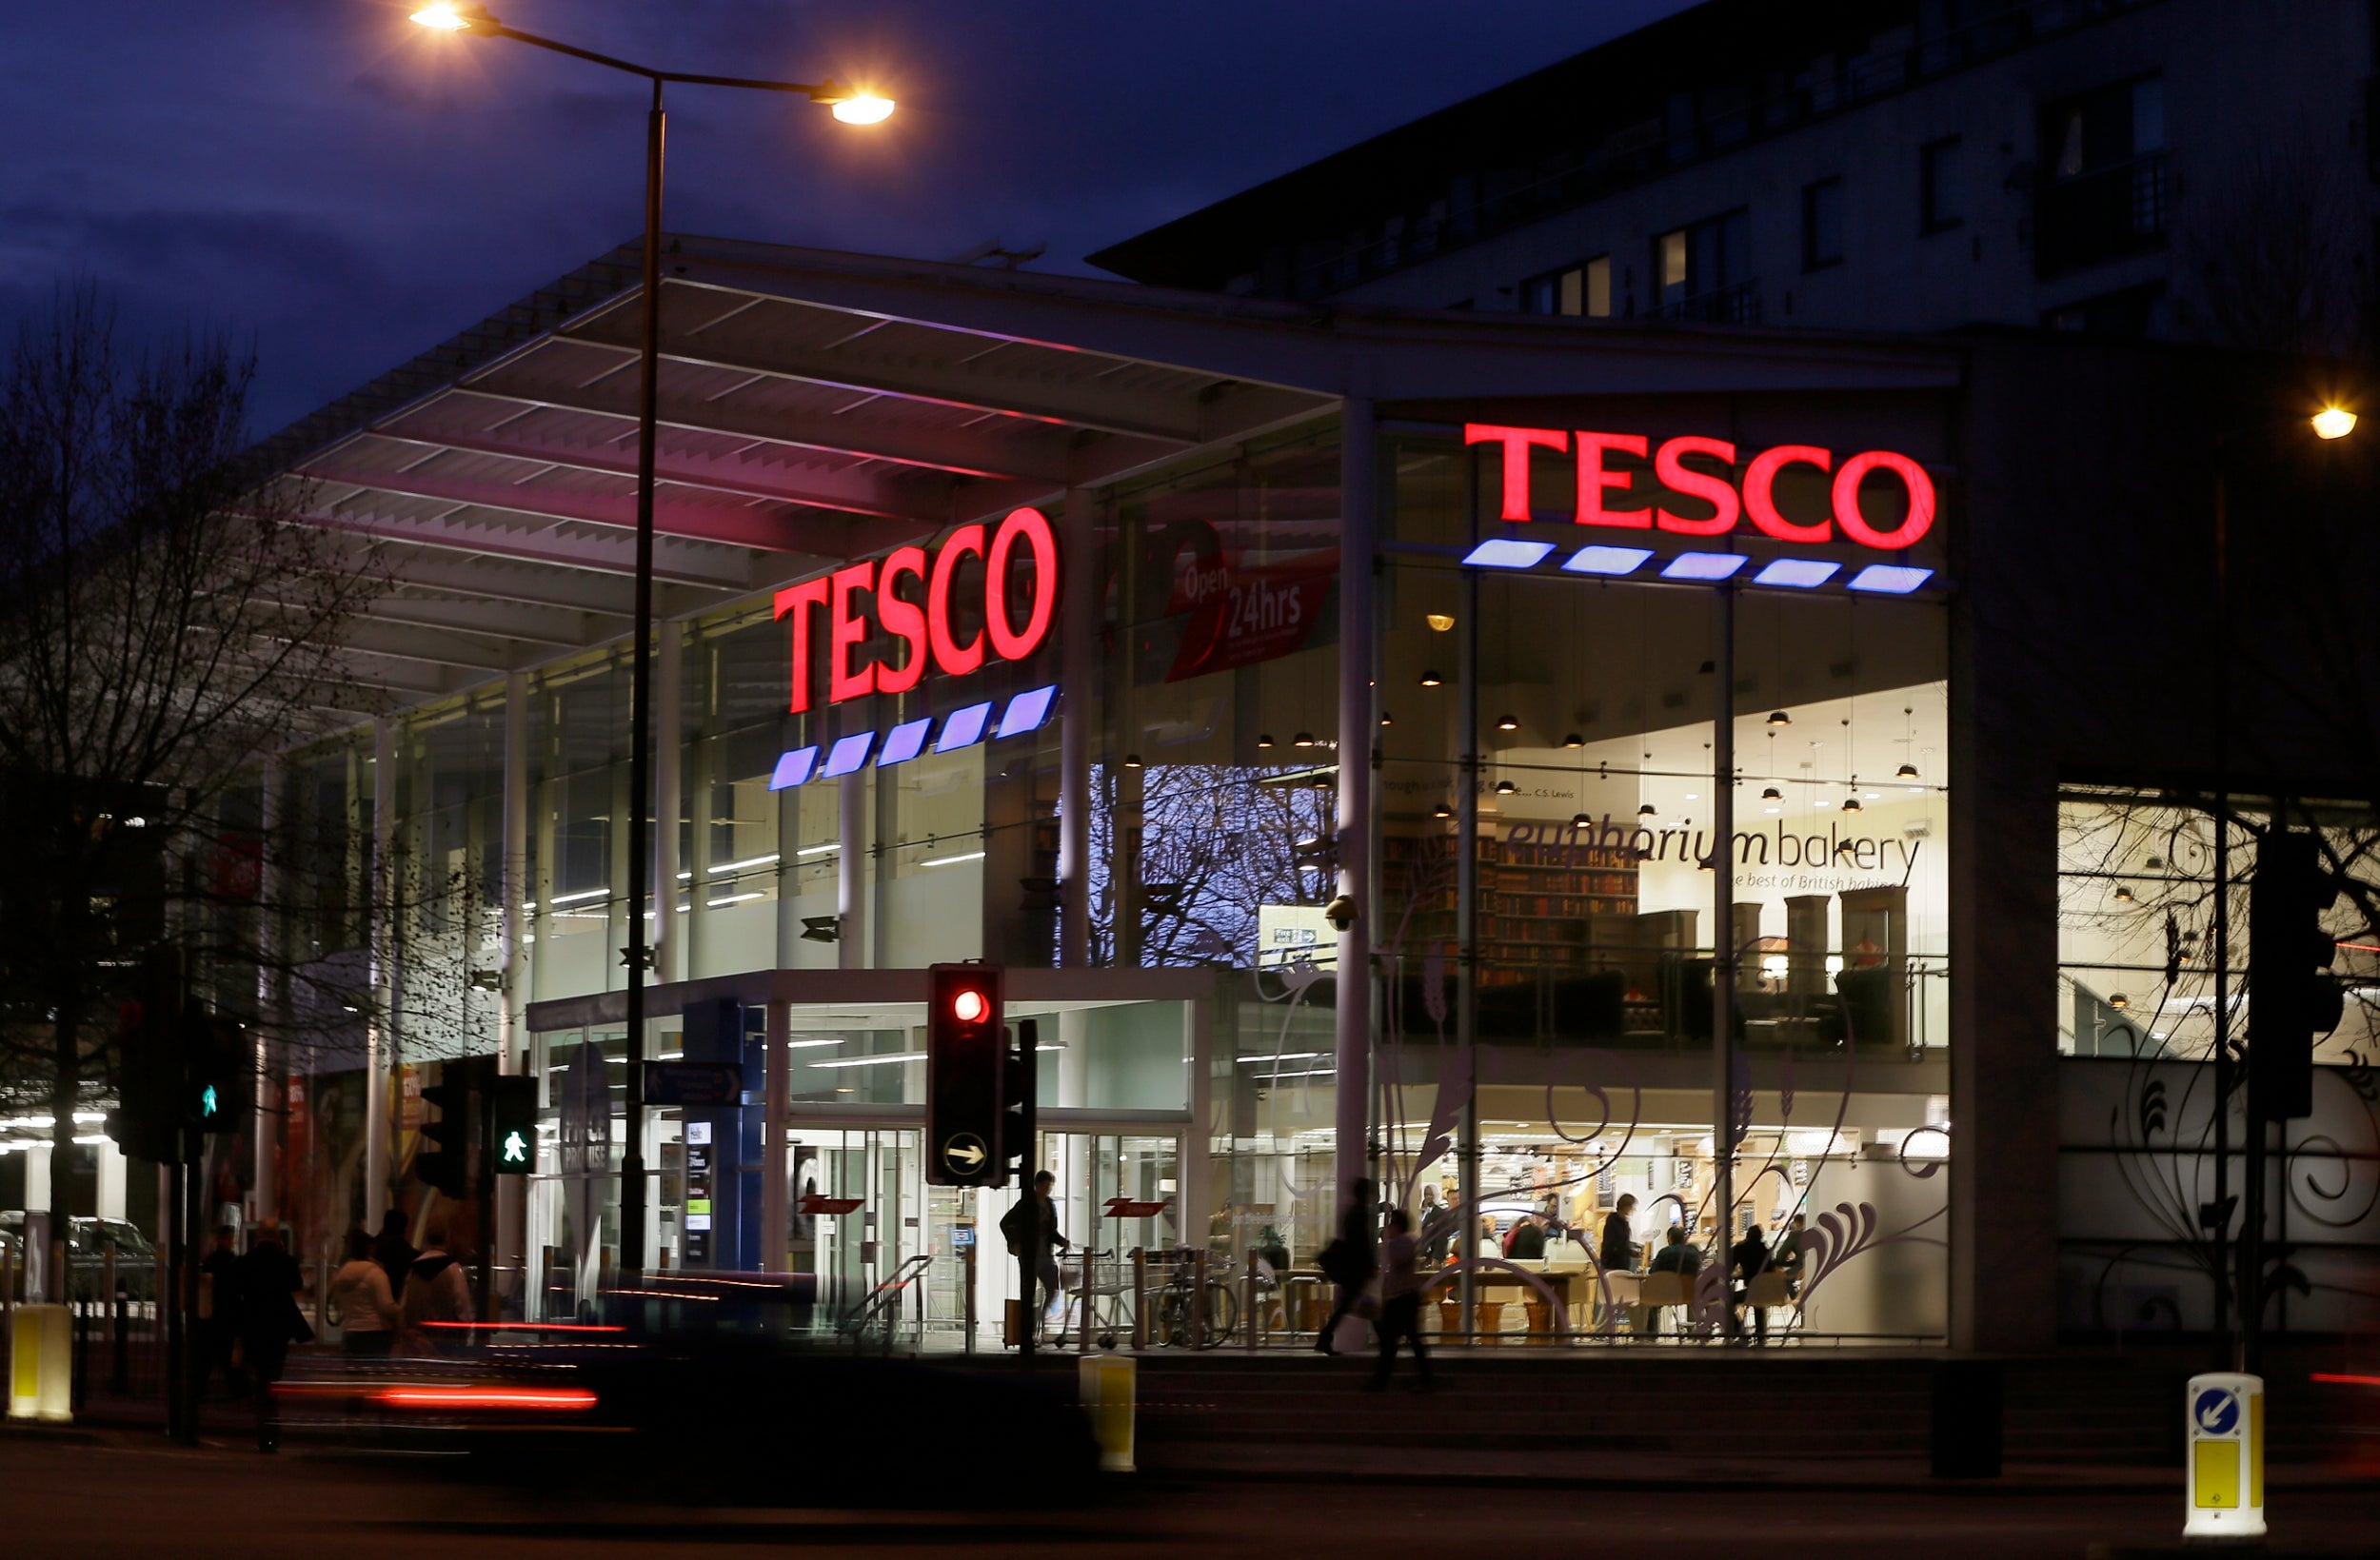 Tesco has not returned fridges rented over Christmas in anticipation of a no deal Brexit